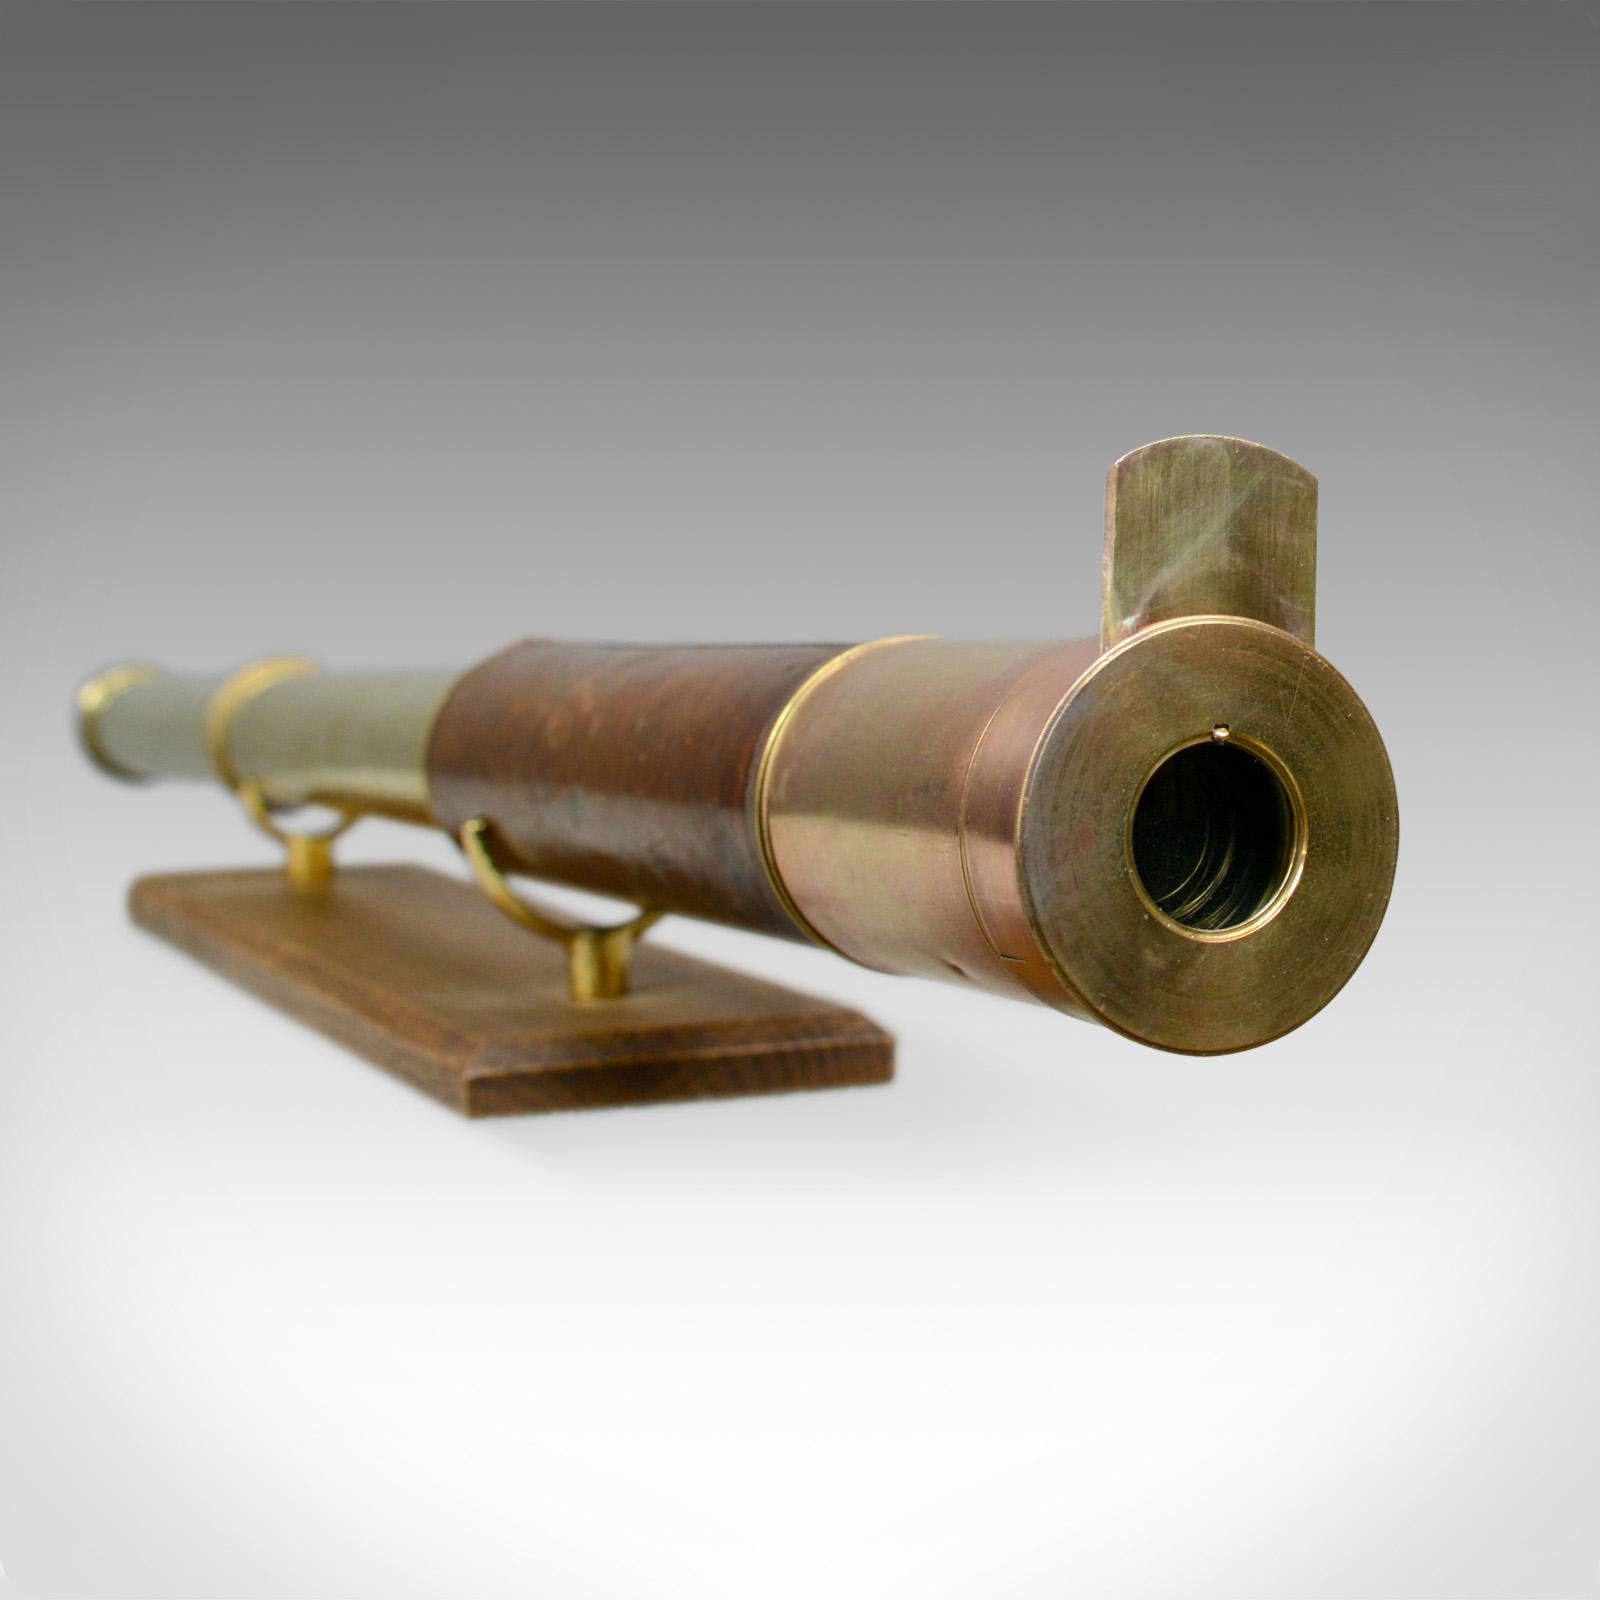 Georgian Antique Telescope, Two Draw, Refractor, Stampa and Son, London, circa 1810